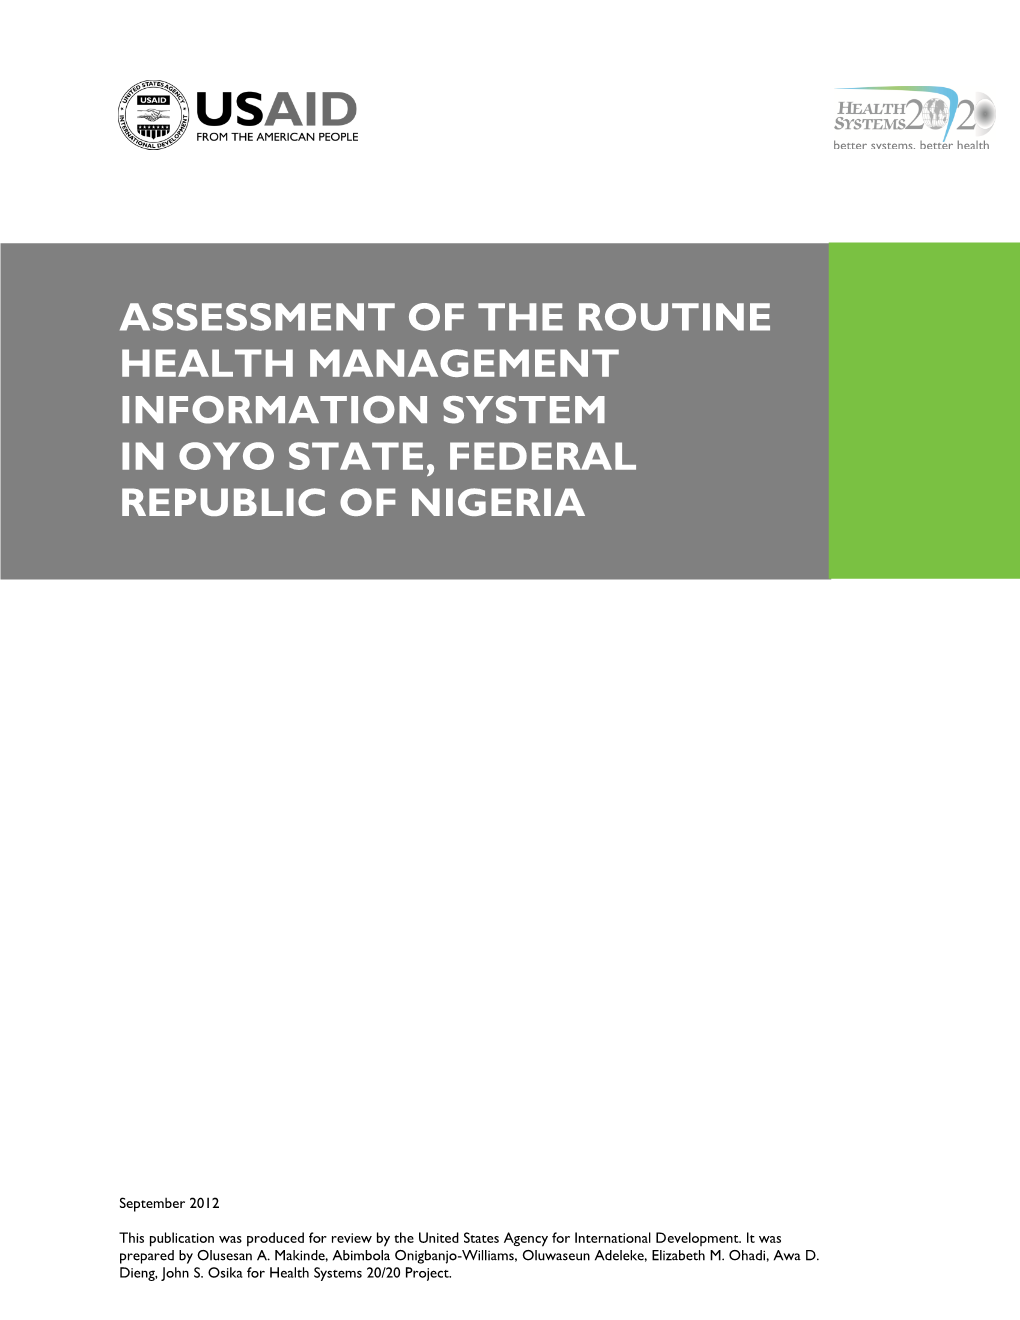 Assessment of the Routine Health Management Information System in Oyo State, Federal Republic of Nigeria